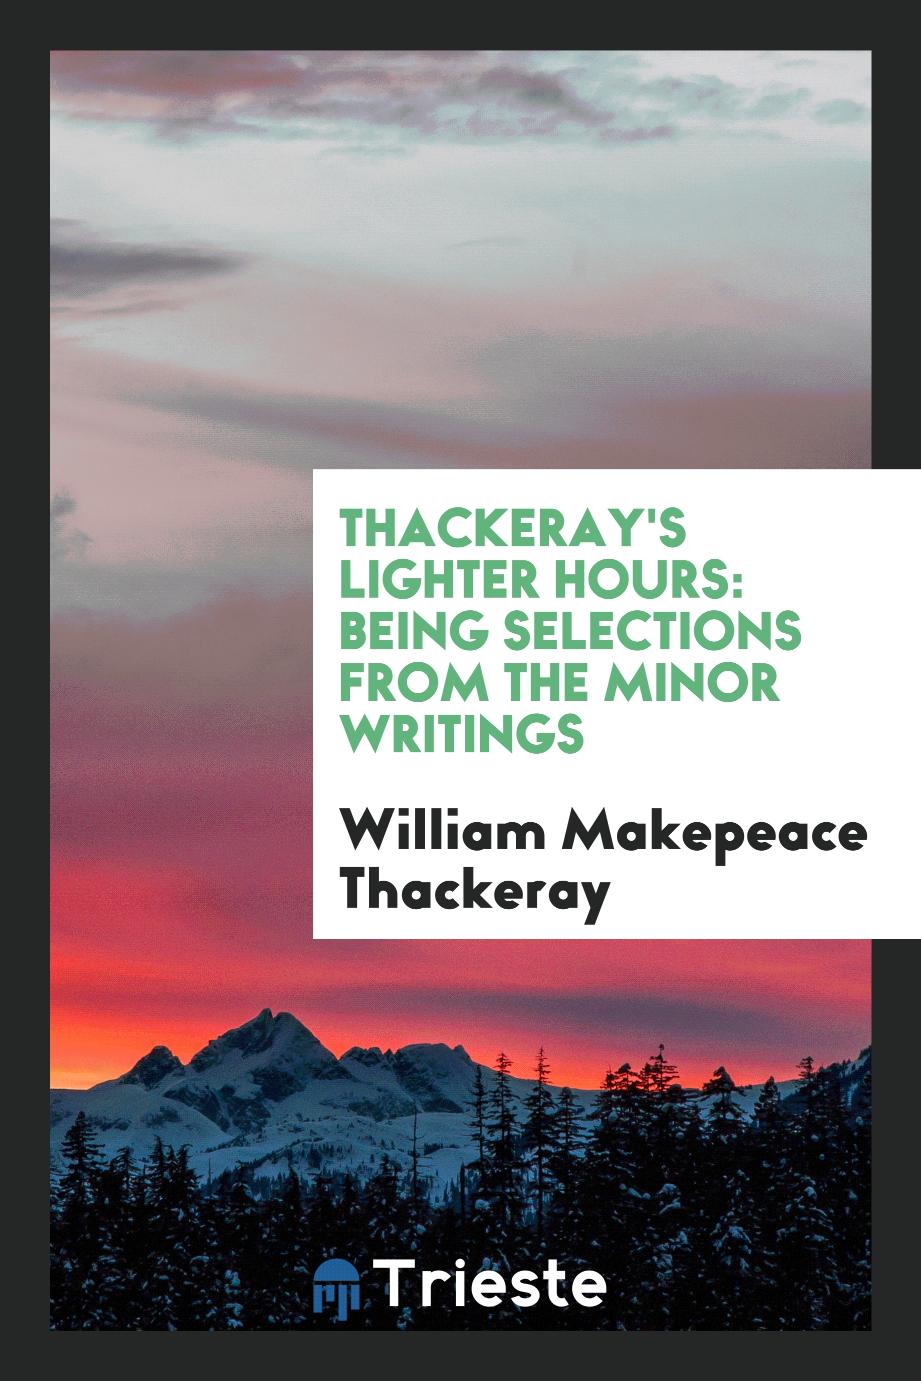 Thackeray's Lighter Hours: Being Selections from the Minor Writings